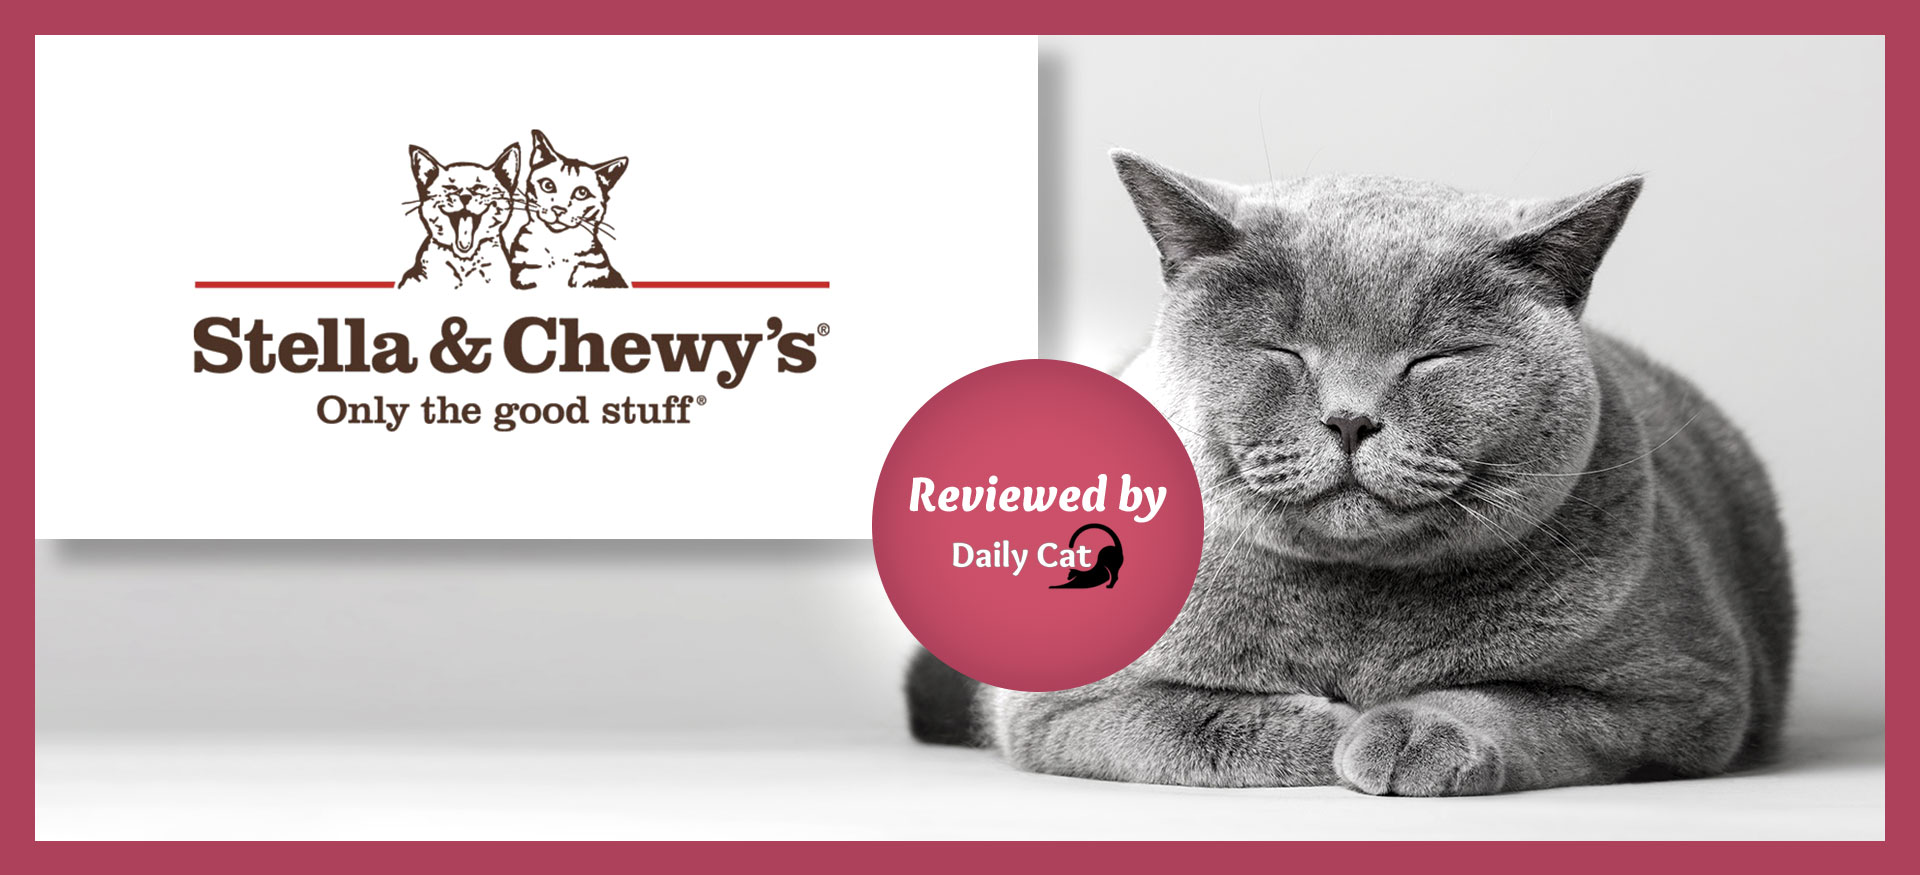 The Daily Cat review stella and chewy's